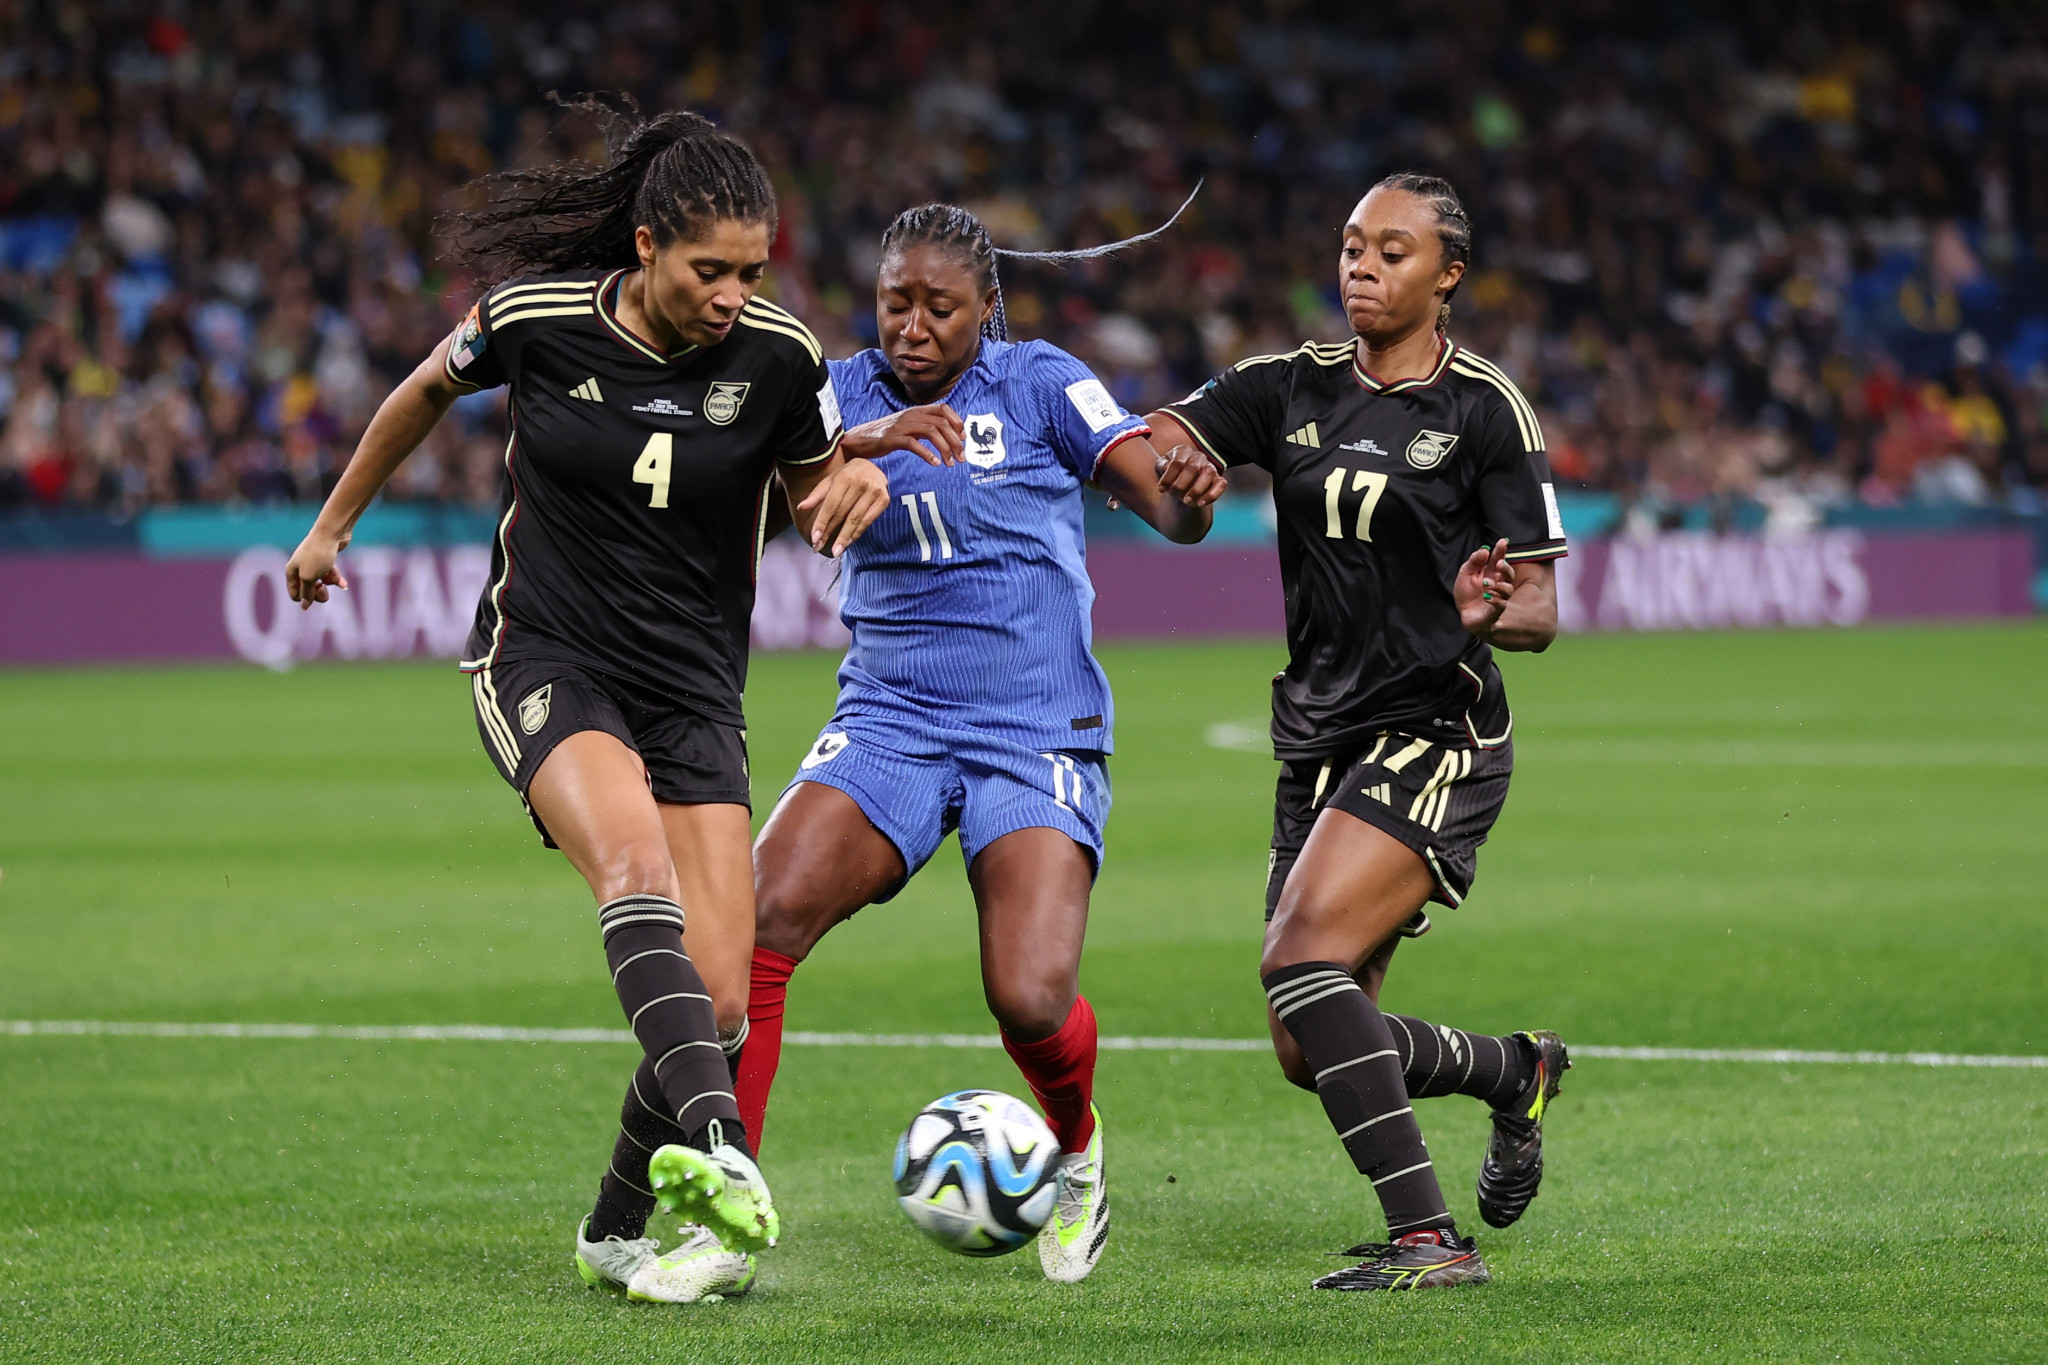 Kadidiatou Diani, centre, battles for the ball on a frustrating day for France as they had to settle for a share of the points against Jamaica ©Getty Images